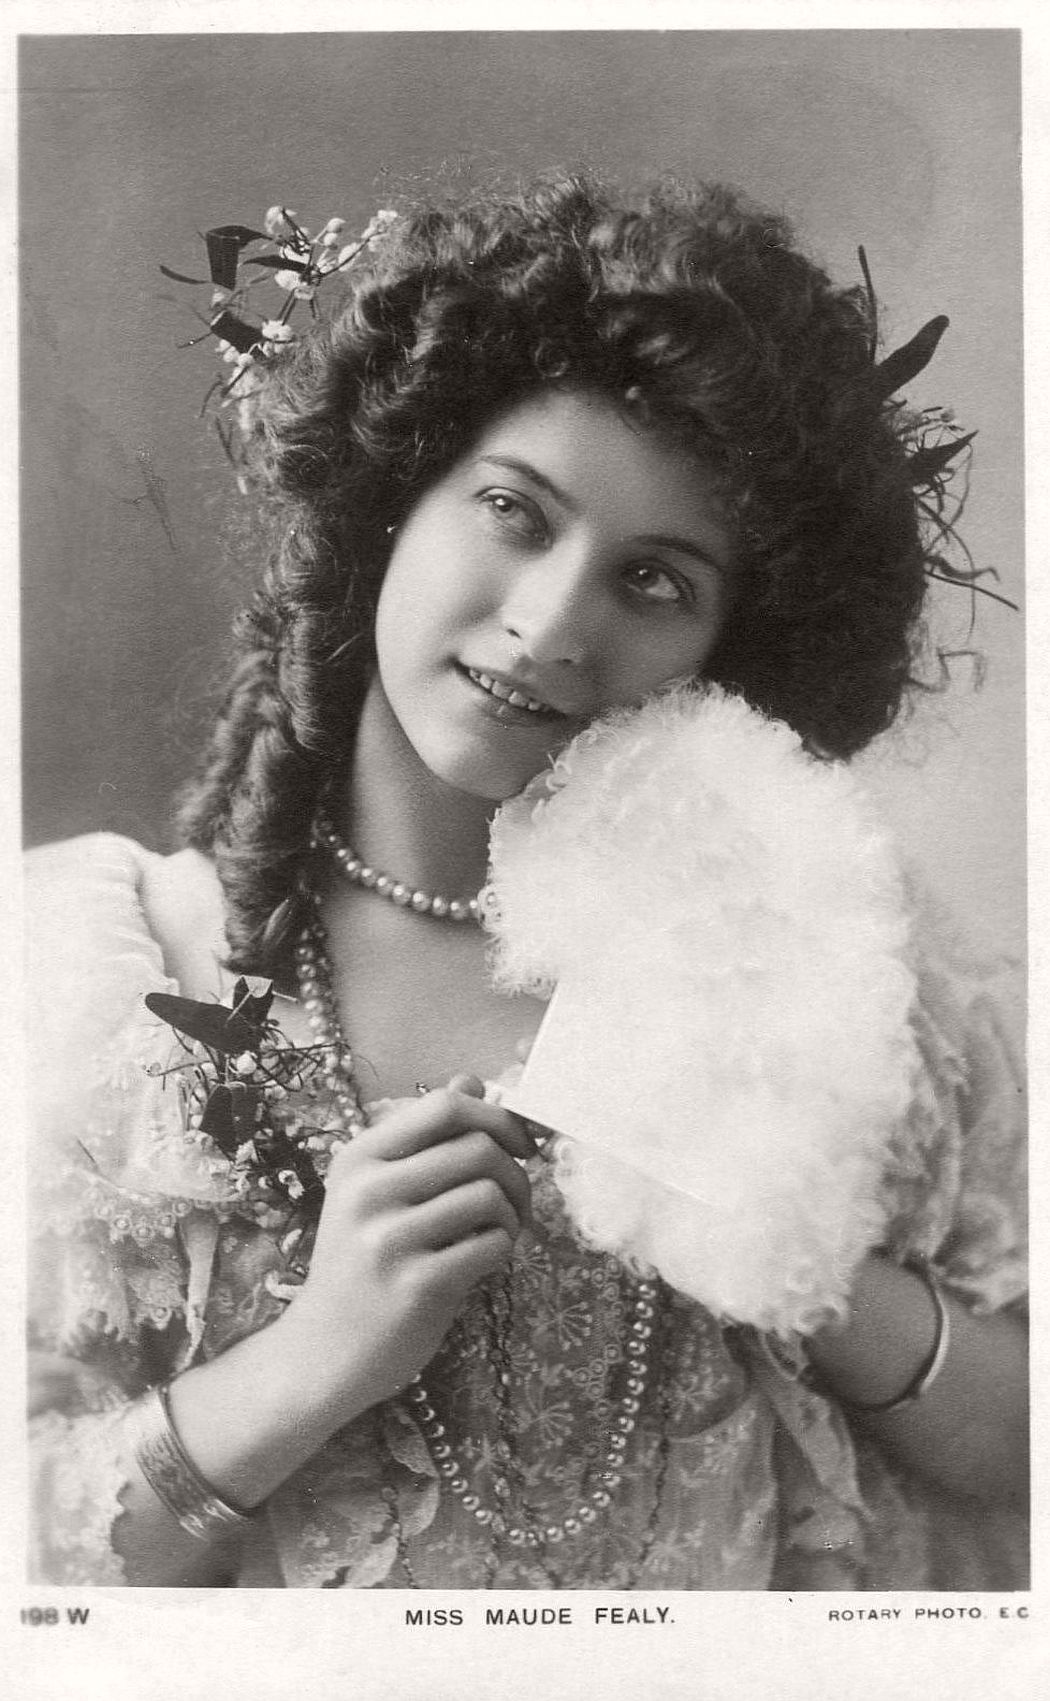 vintage-postcard-of-actress-miss-maude-fealy-1900s-early-xx-century-20